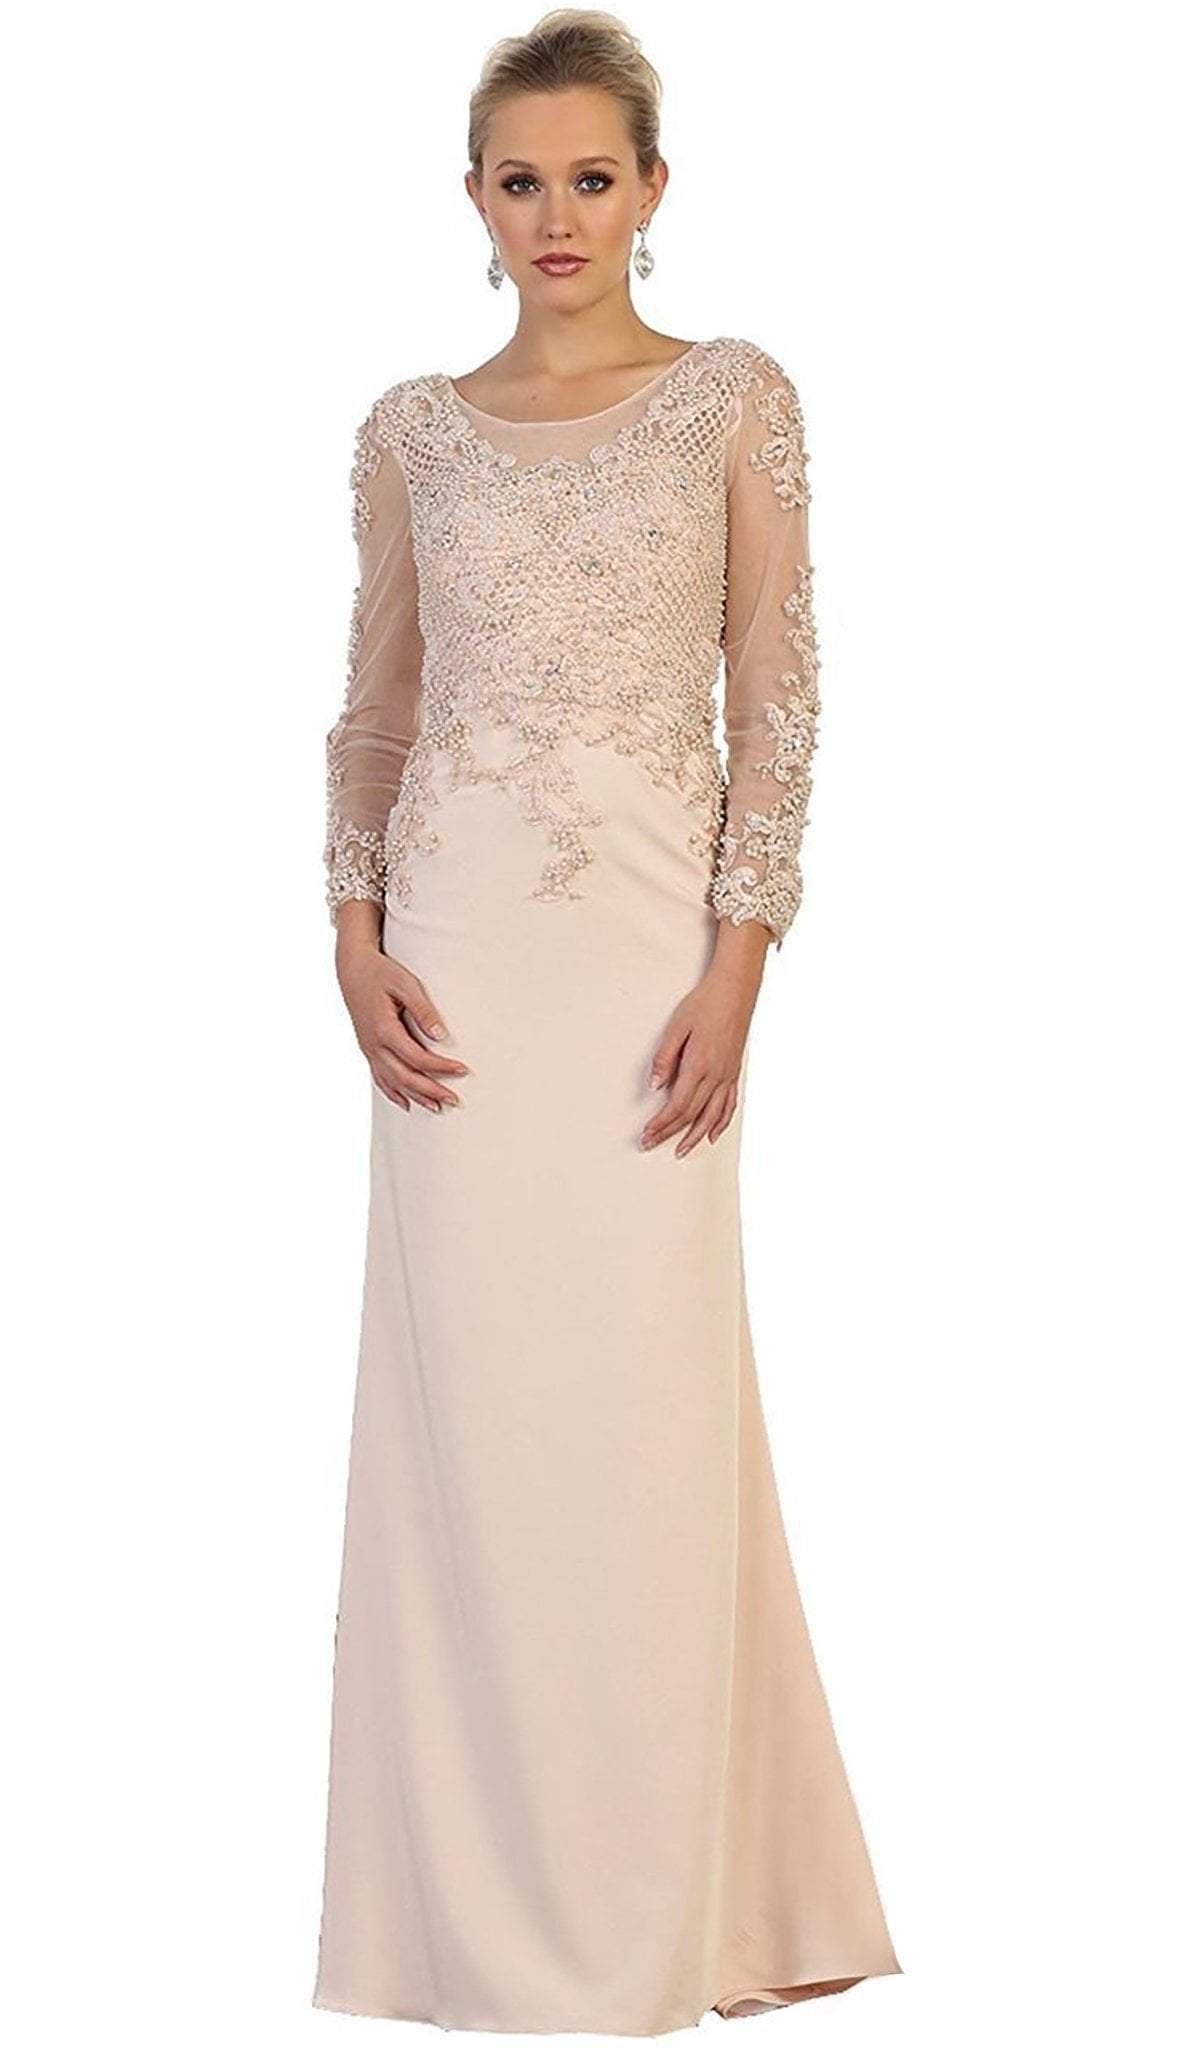 May Queen - RQ7594 Embellished Long Sleeve Illusion Scoop Sheath Mother of the Bride Gown Special Occasion Dress S / Blush